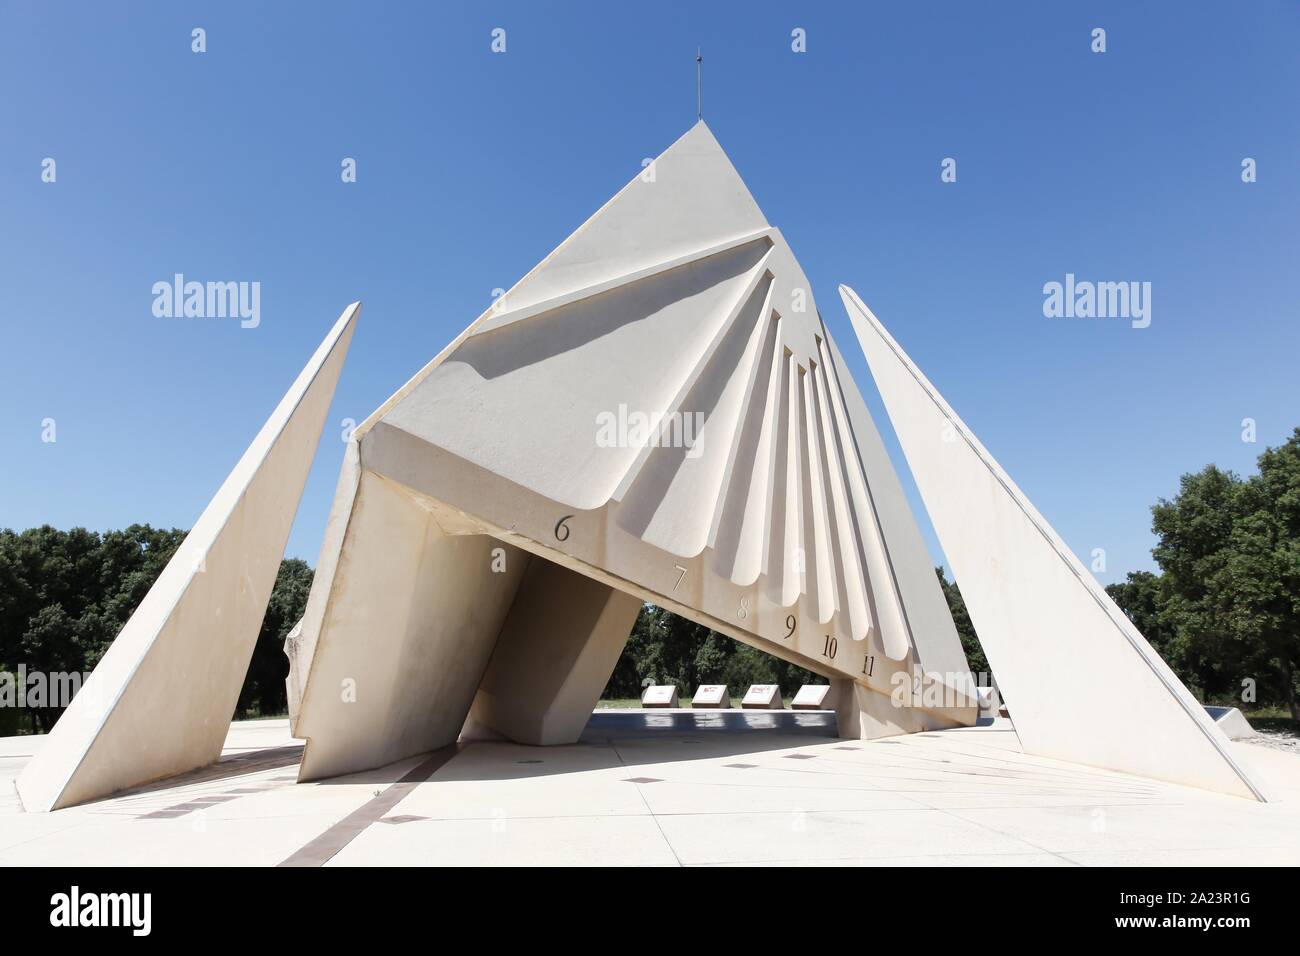 Tavel, France - July 1, 2018: Big sundial installed on the edge of the A9 motorway on the rest area of Tavel Nord, in Tavel, France Stock Photo